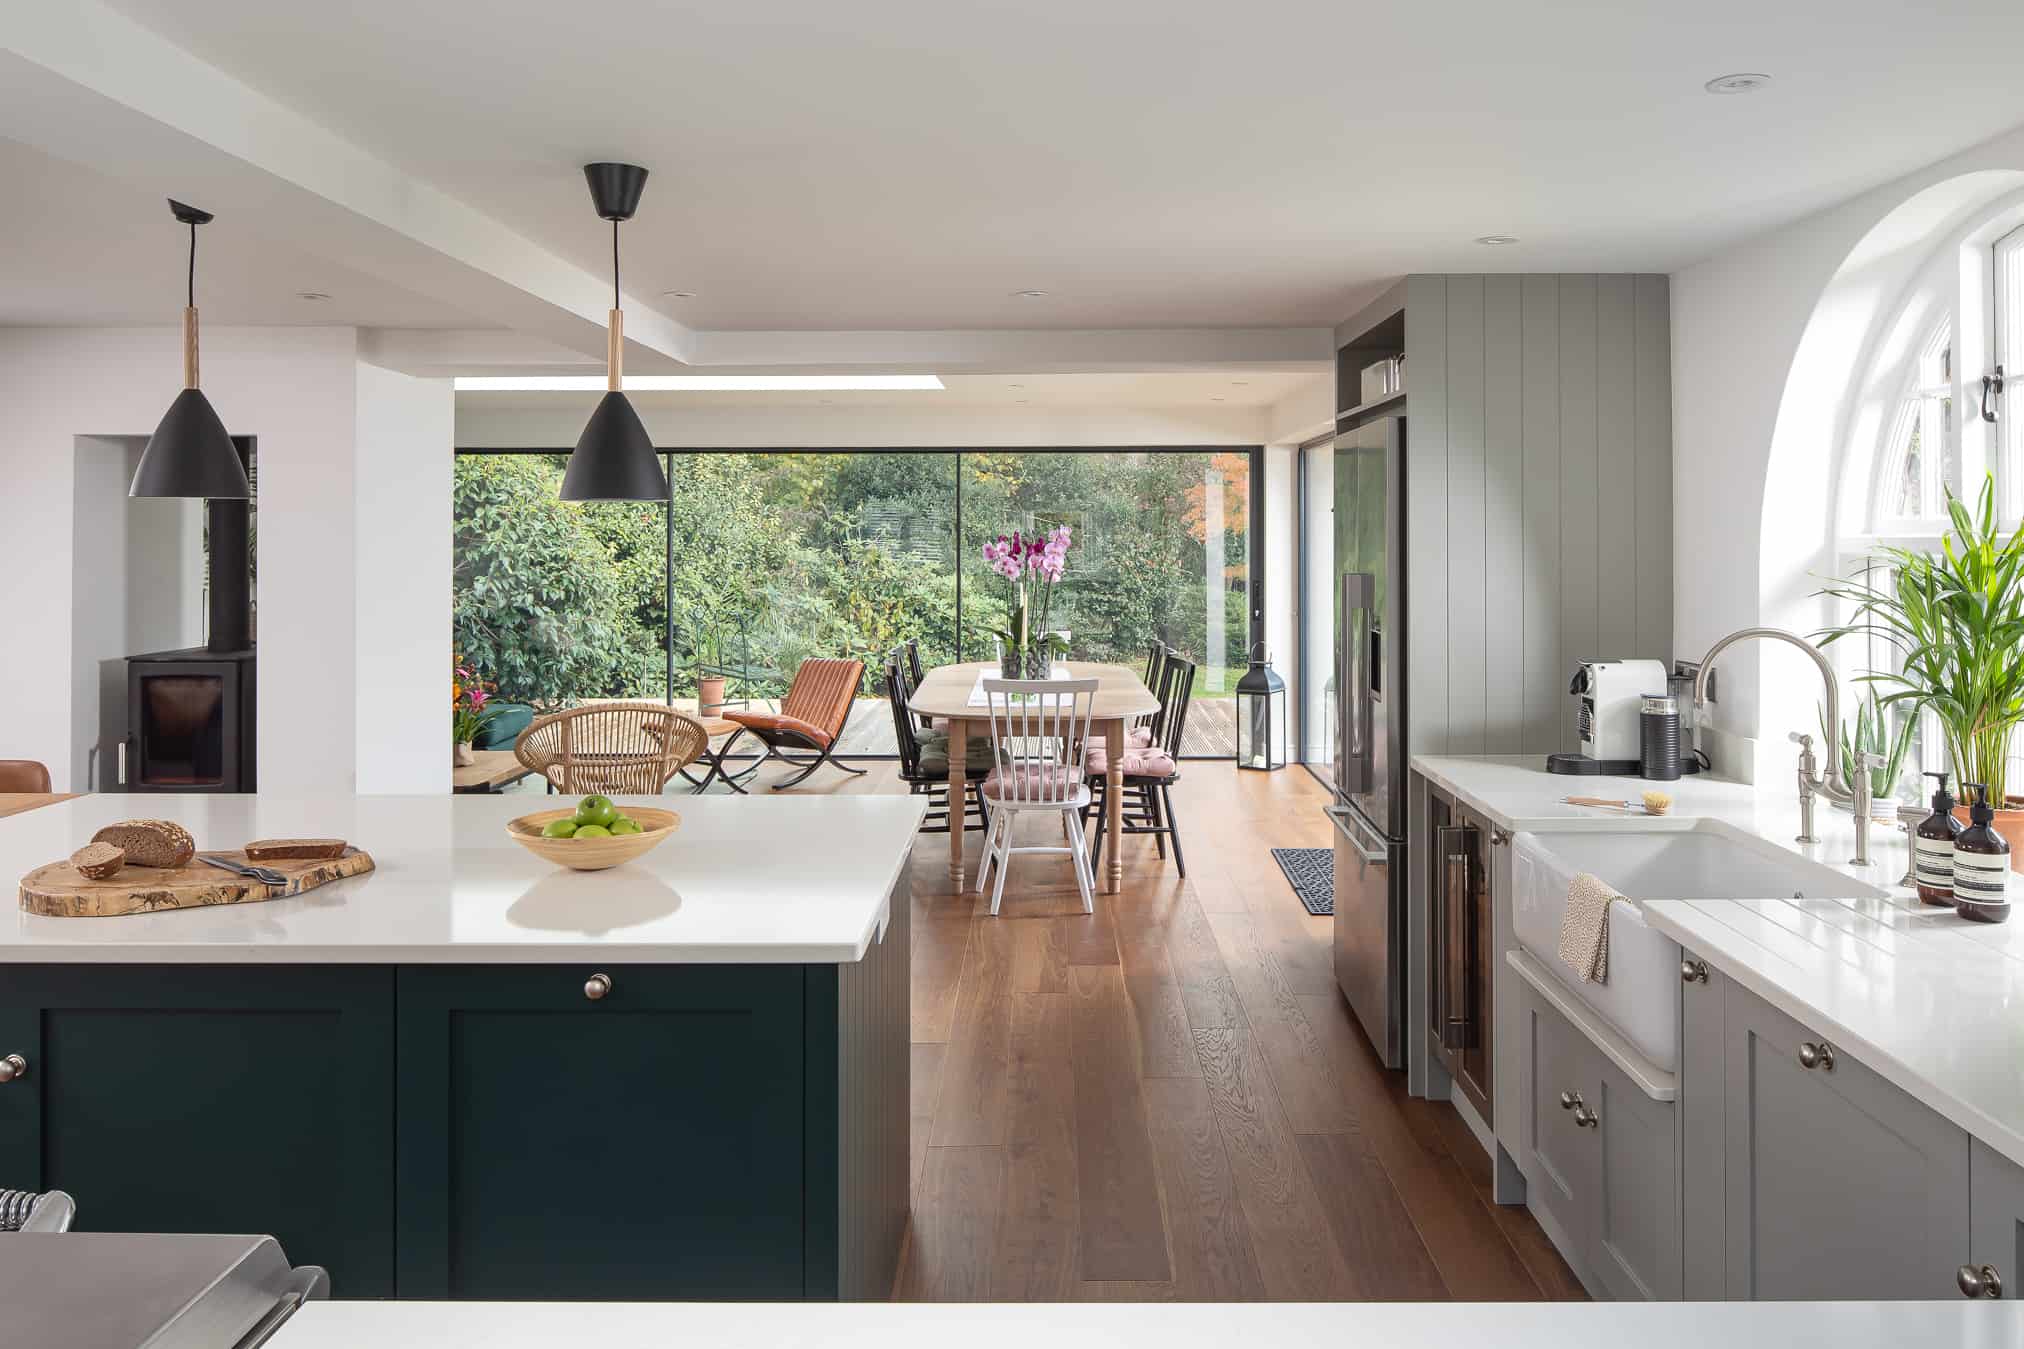 John Lewis of Hungerford kitchen island with white marble granite worktops and wooden flooring with open plan kitchen diner